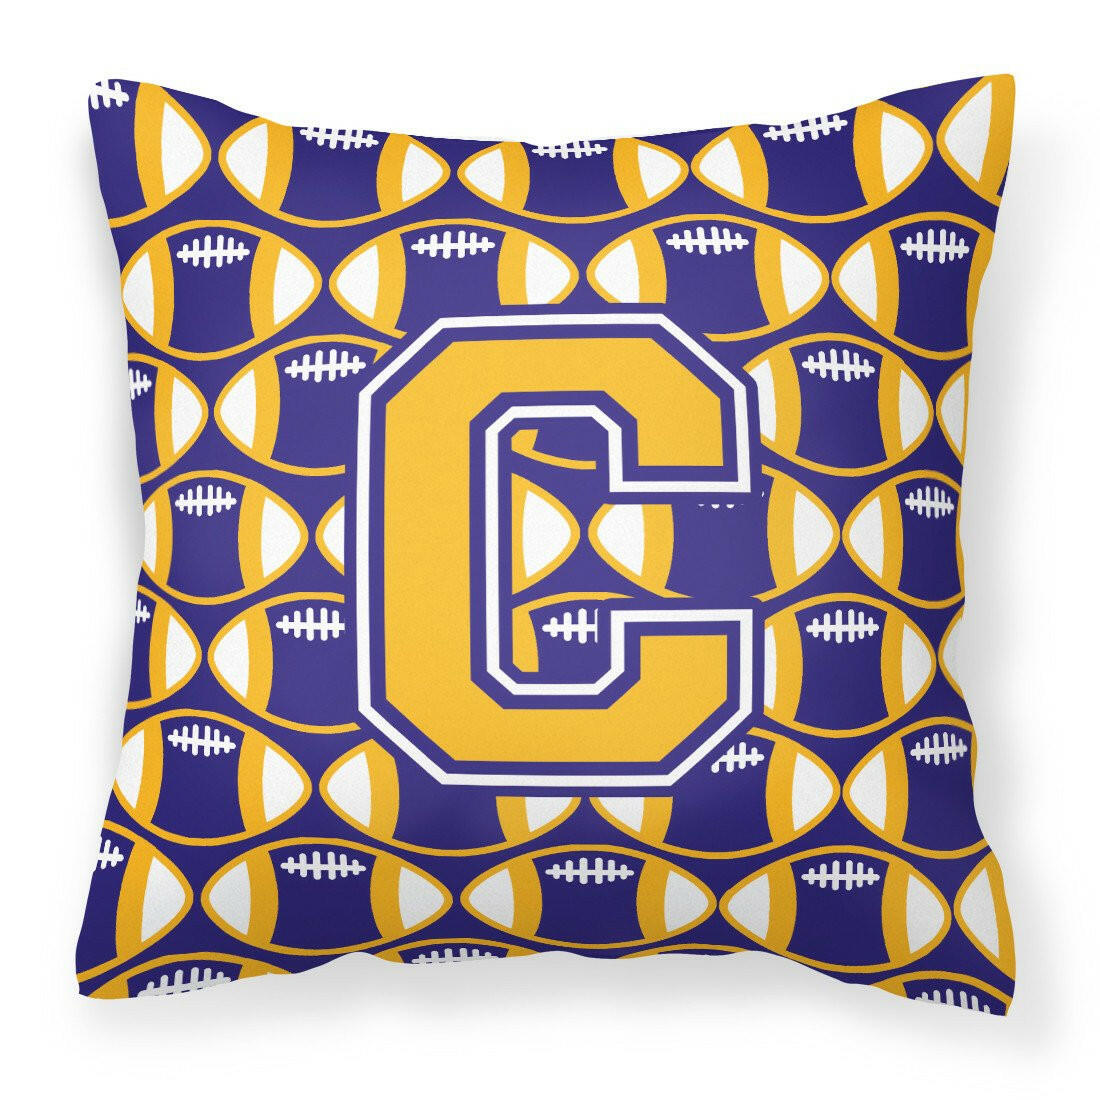 Letter C Football Purple and Gold Fabric Decorative Pillow CJ1064-CPW1414 by Caroline's Treasures